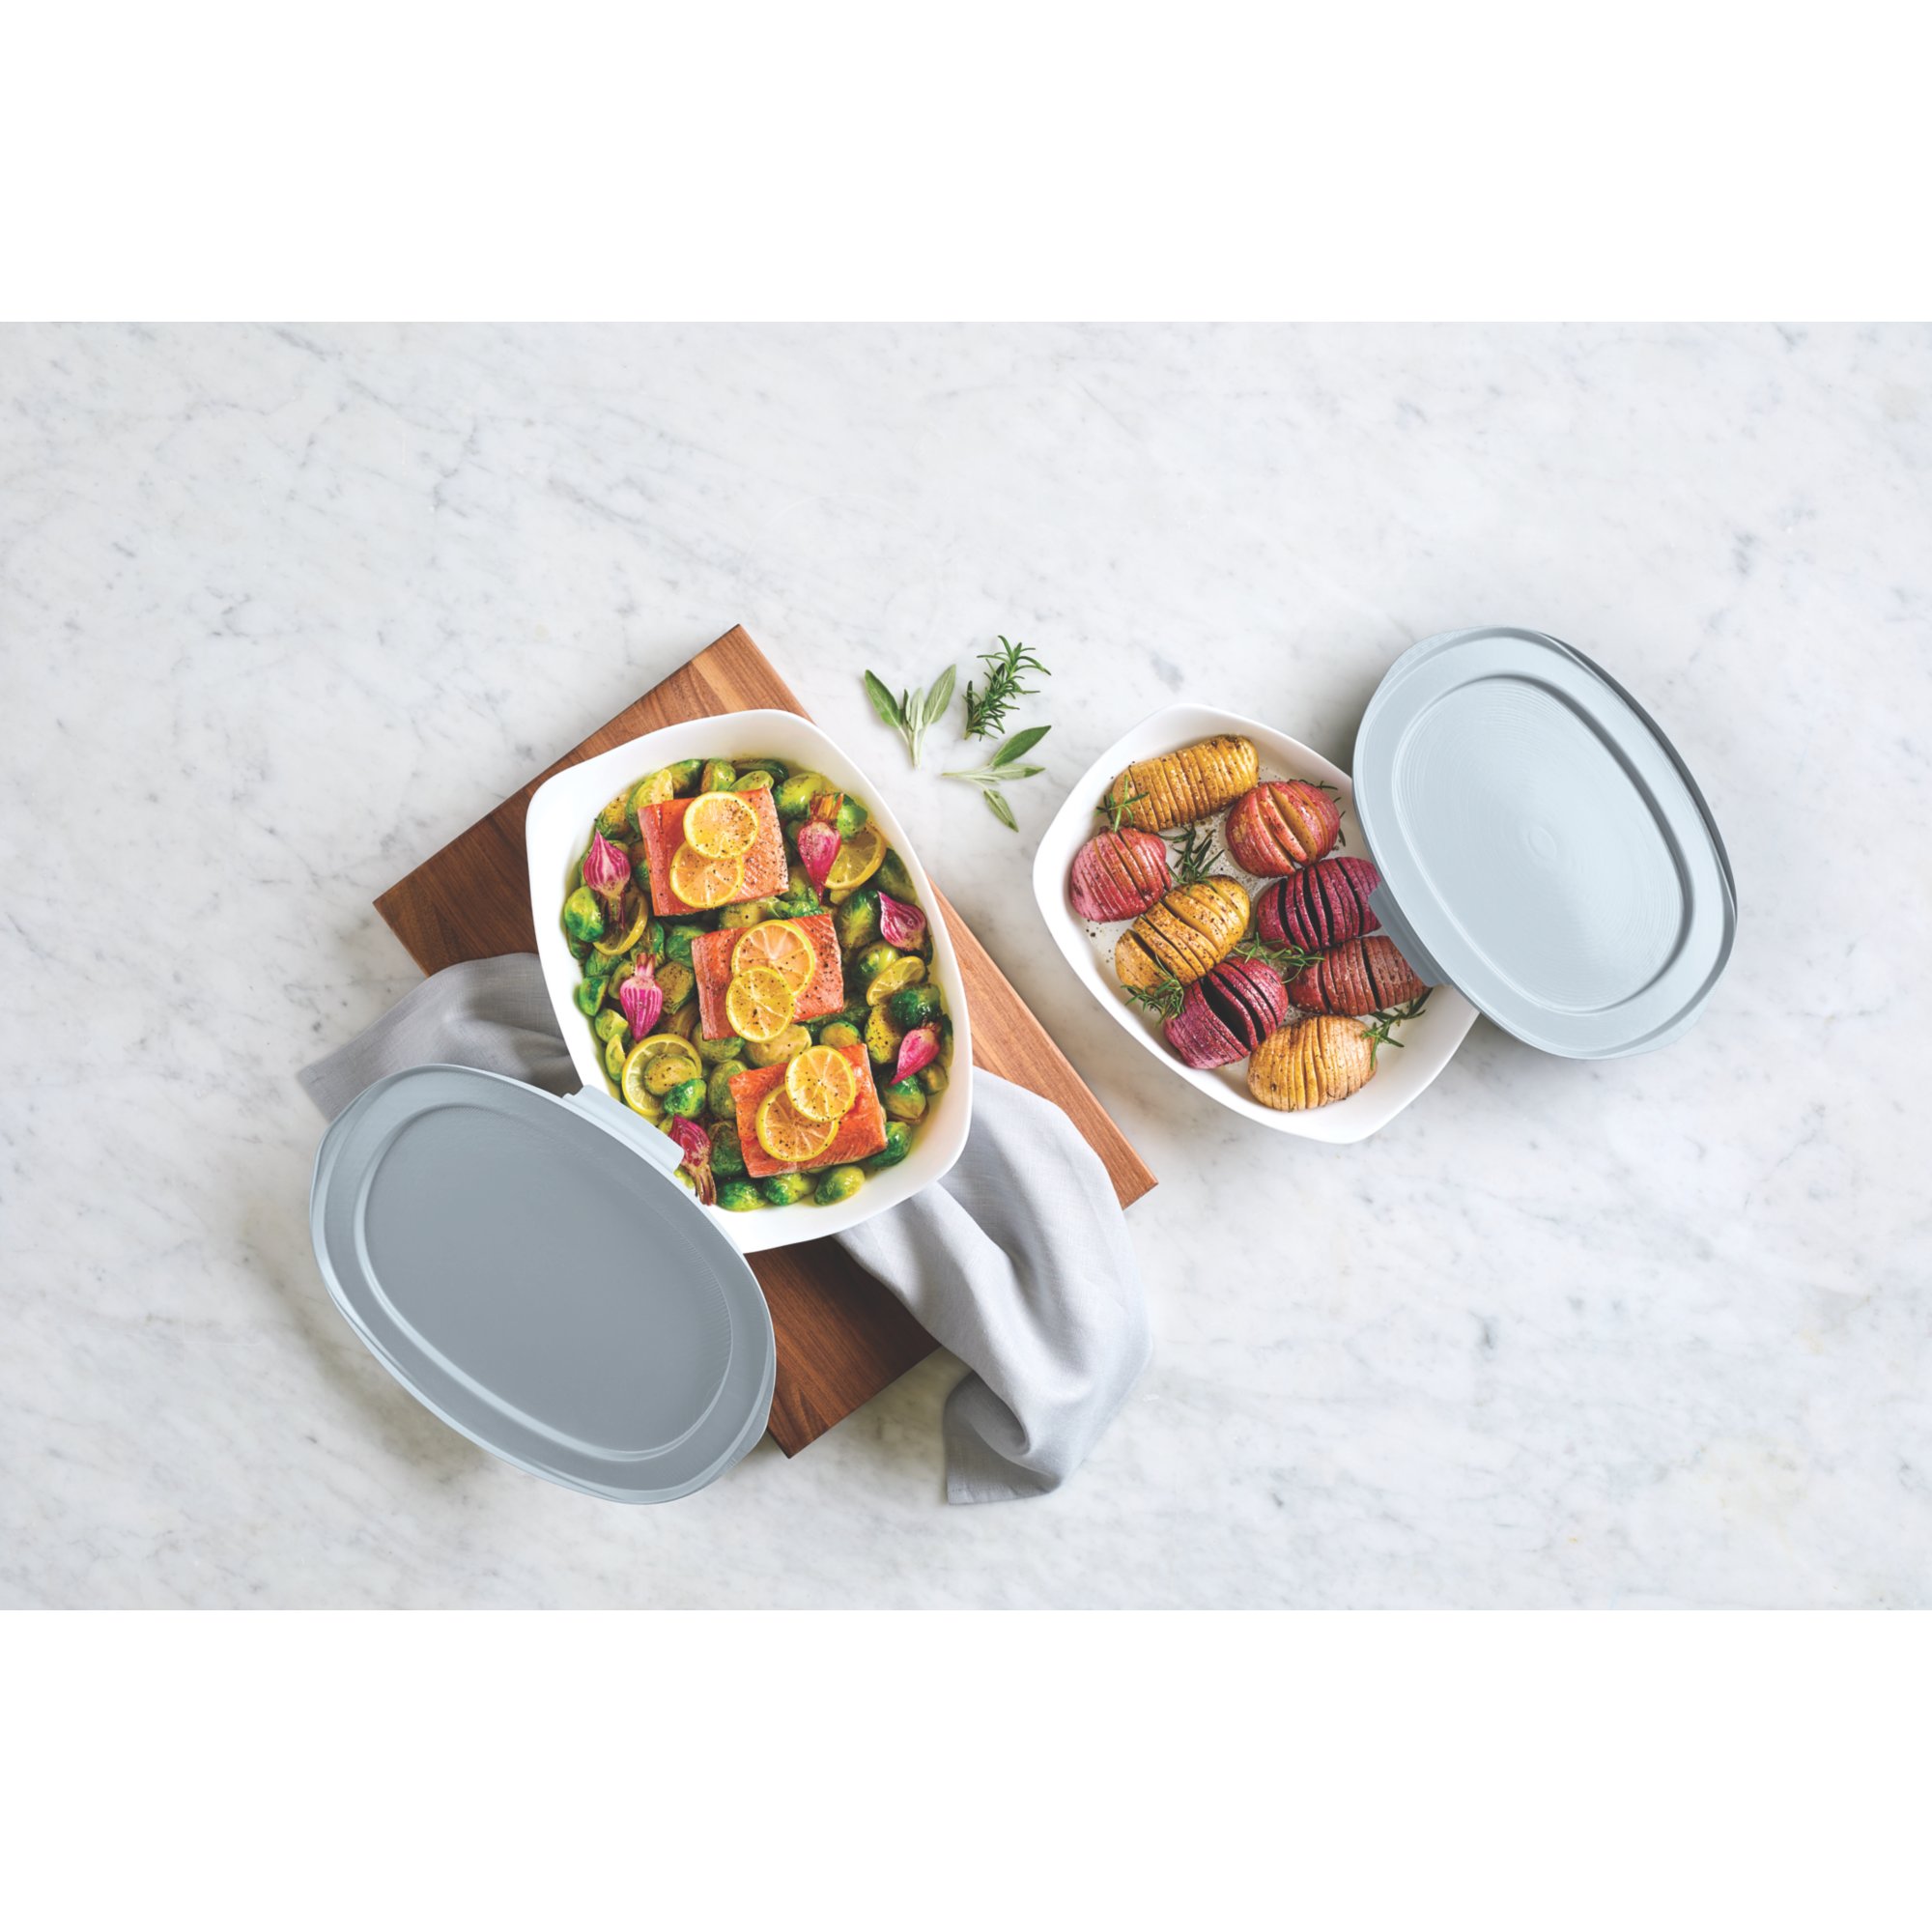 https://s7d9.scene7.com/is/image/NewellRubbermaid/SAP-rubbermaid-food-storage-bakeware-11.7in-12.5in-rectangle-lids-with-food-overhead-lifestyle-1?wid=2000&hei=2000